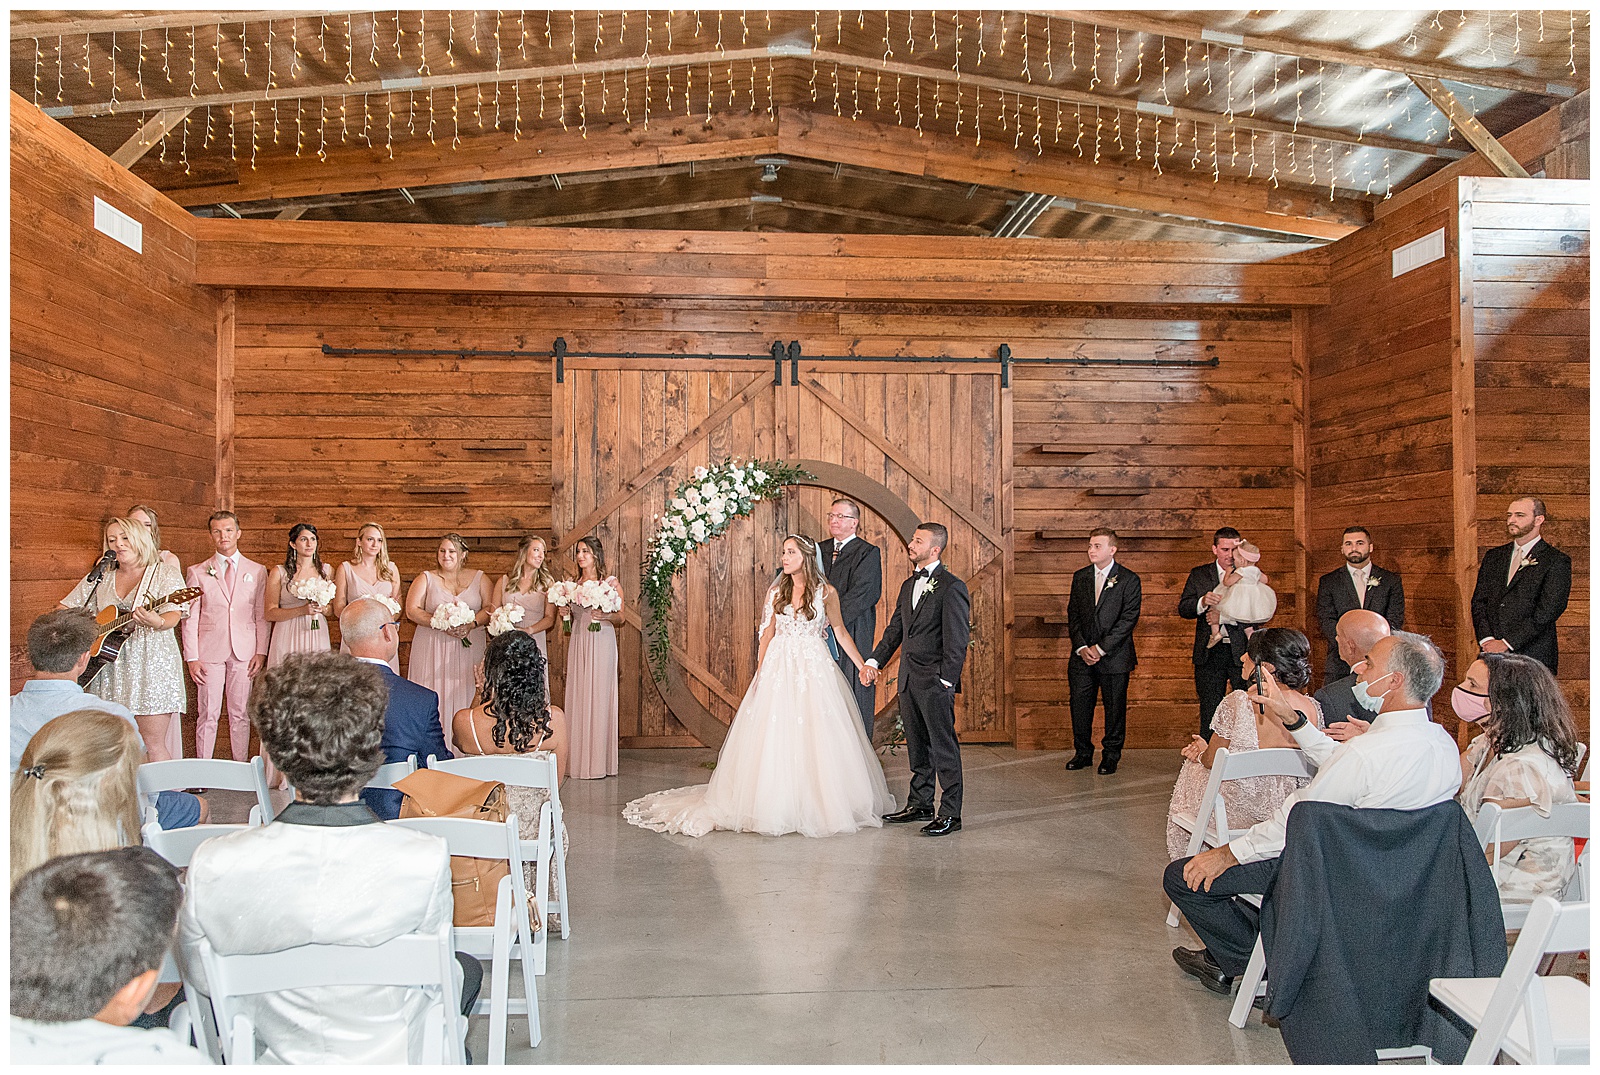 rustic barn wedding ceremony with exposed wood beams and barn door at The Barn at Silverstone